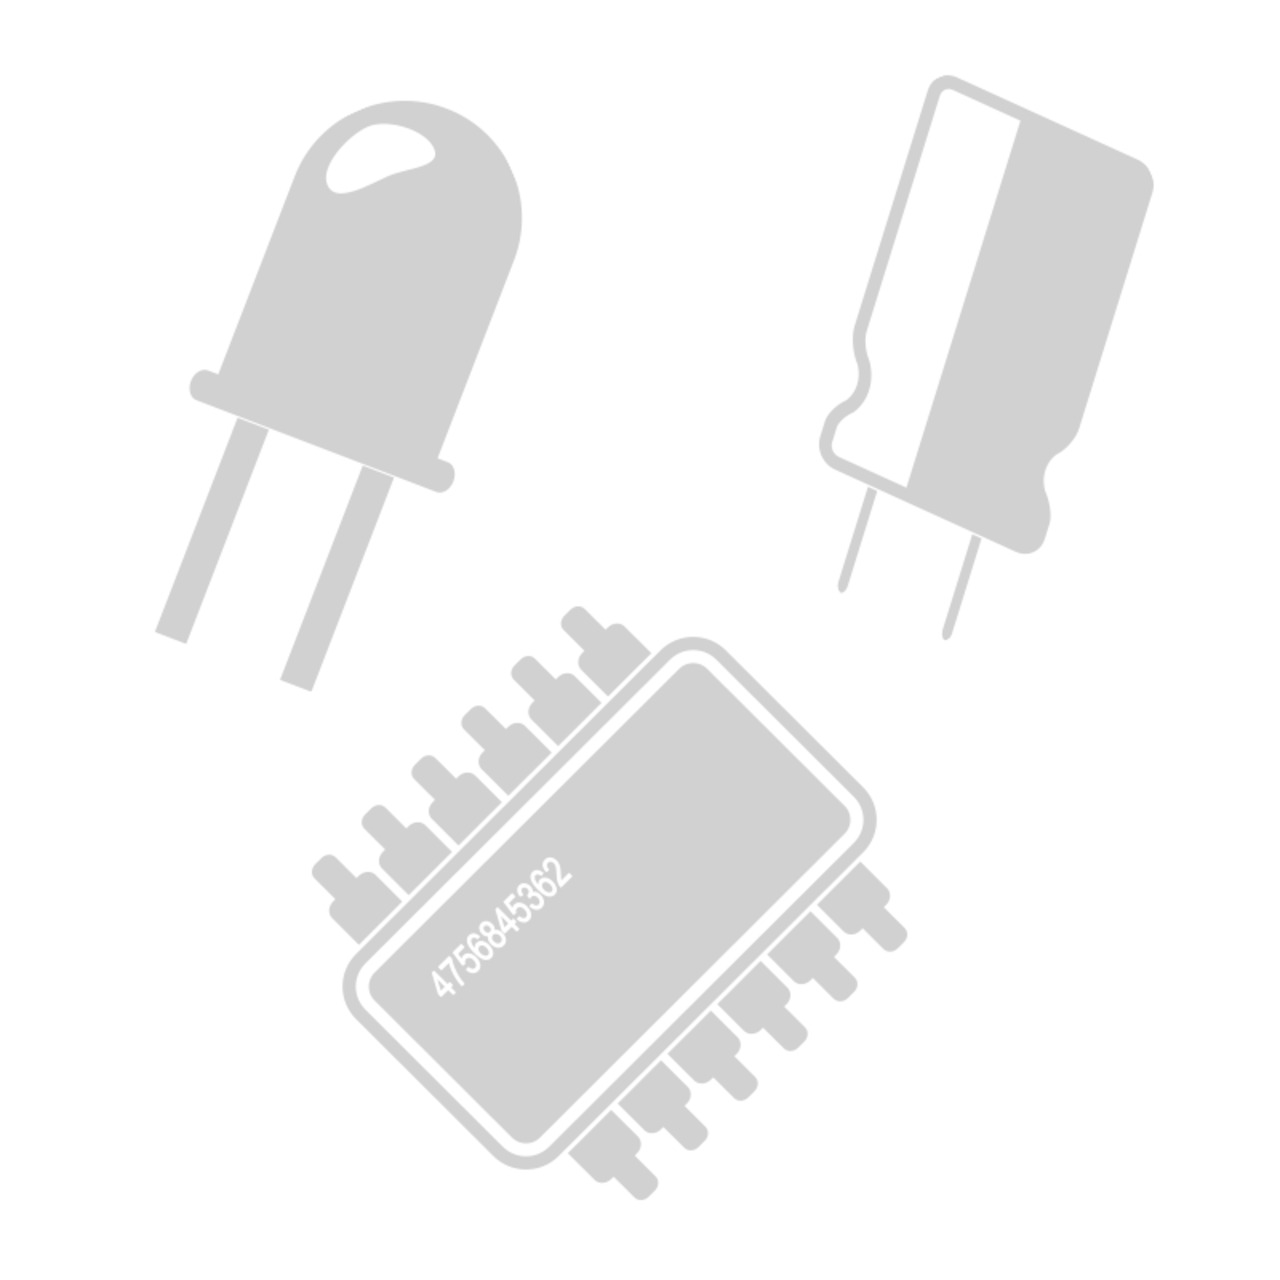 SMD-Chip-LEDs- Weiss- Bauform 1206